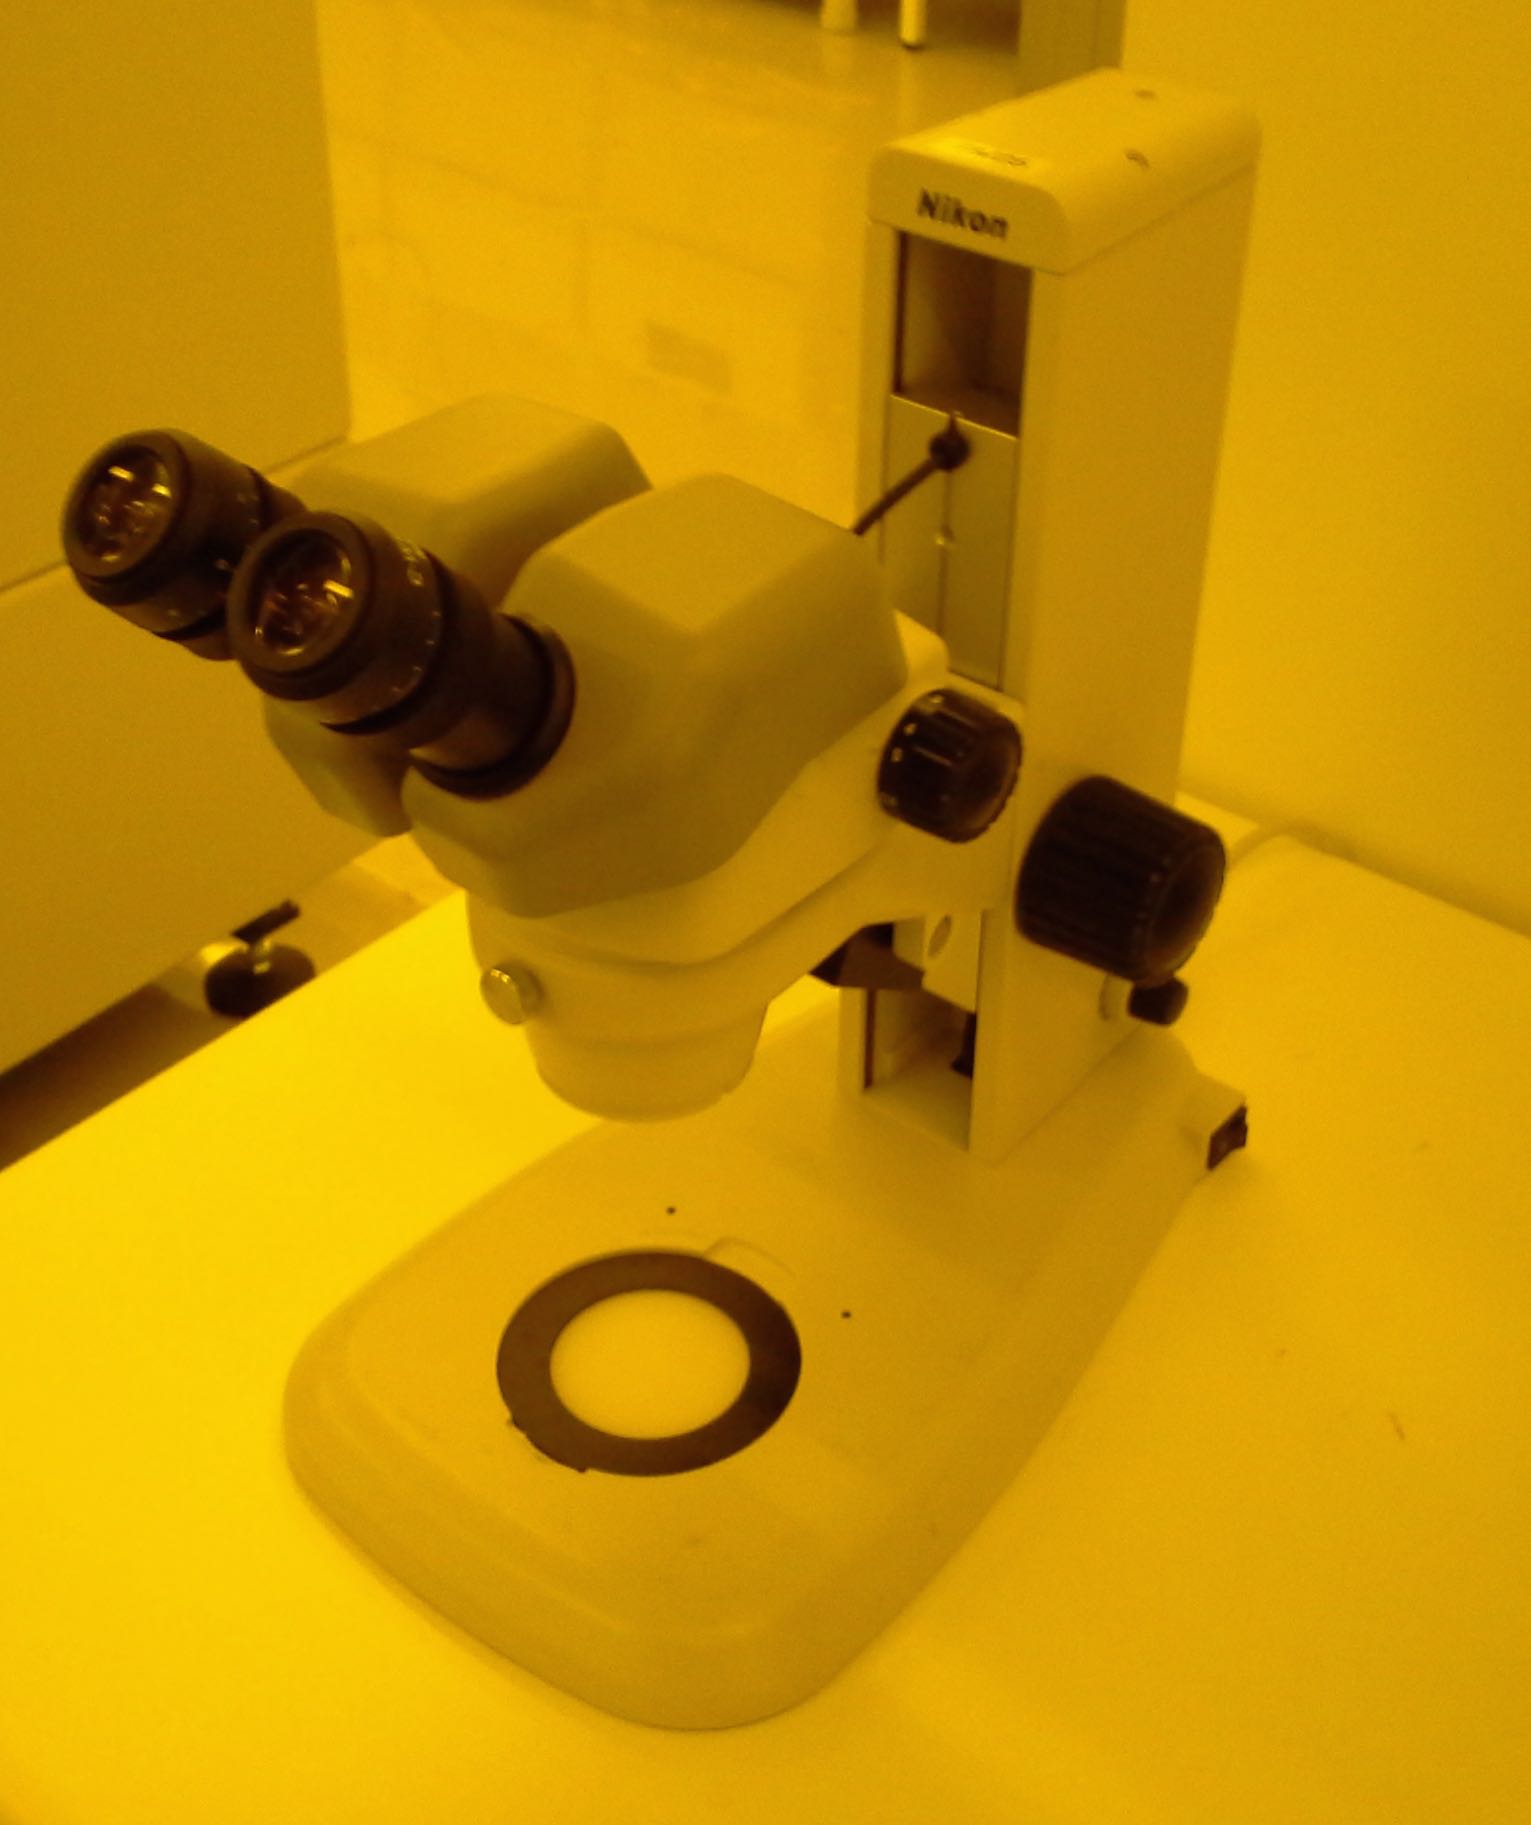 Picture of Stereo Microscope